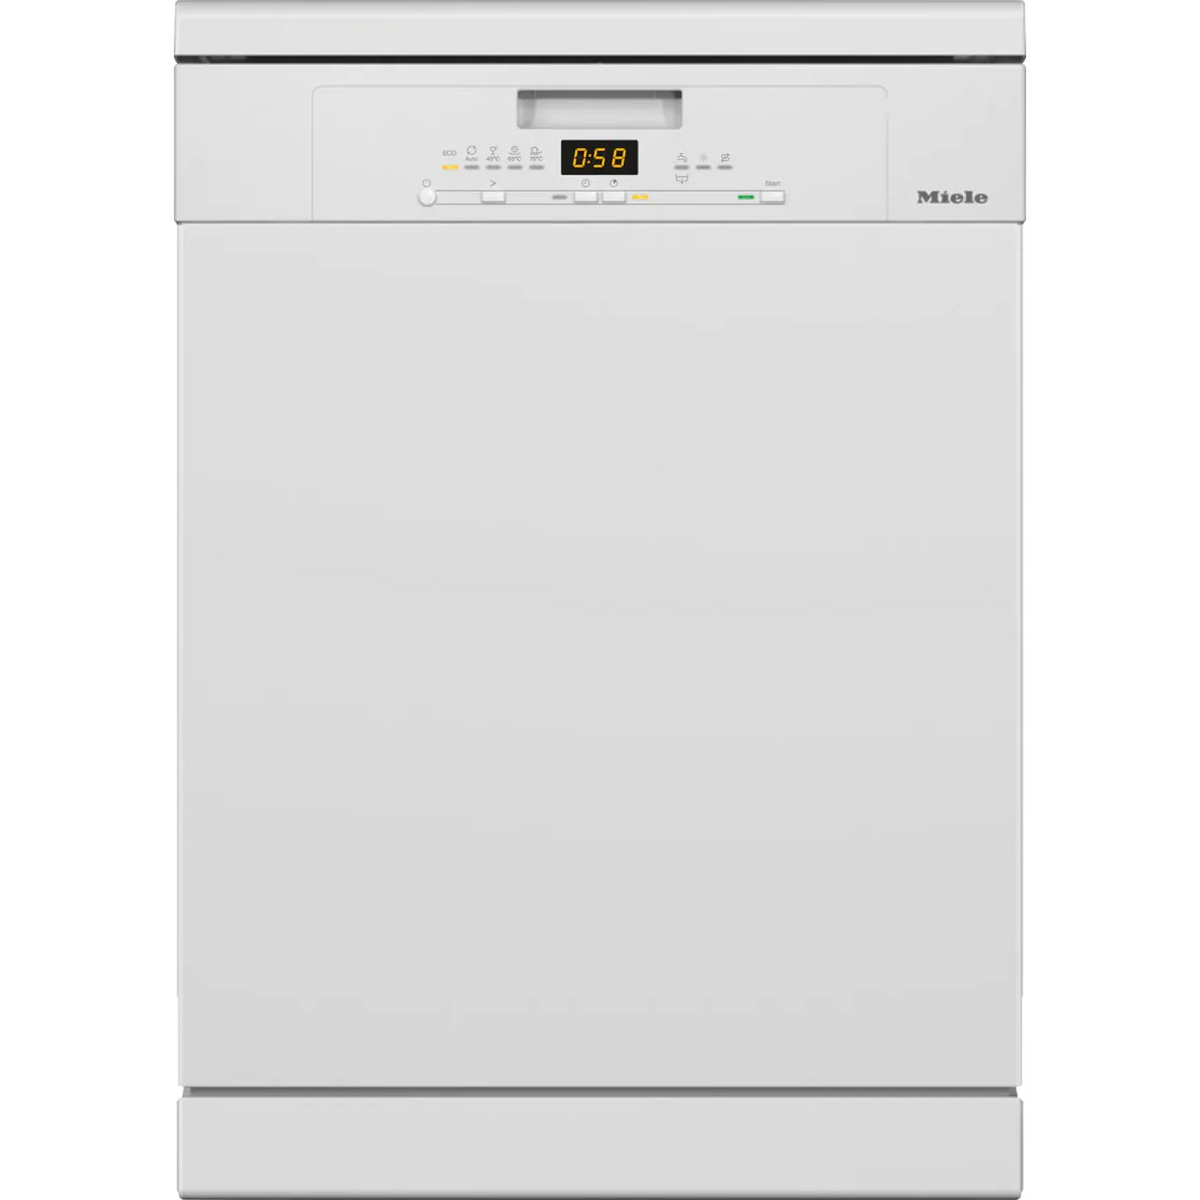 Miele 60cm 14 Place Freestanding Standard Dishwasher - Brilliant White | G5110SC from Miele - DID Electrical